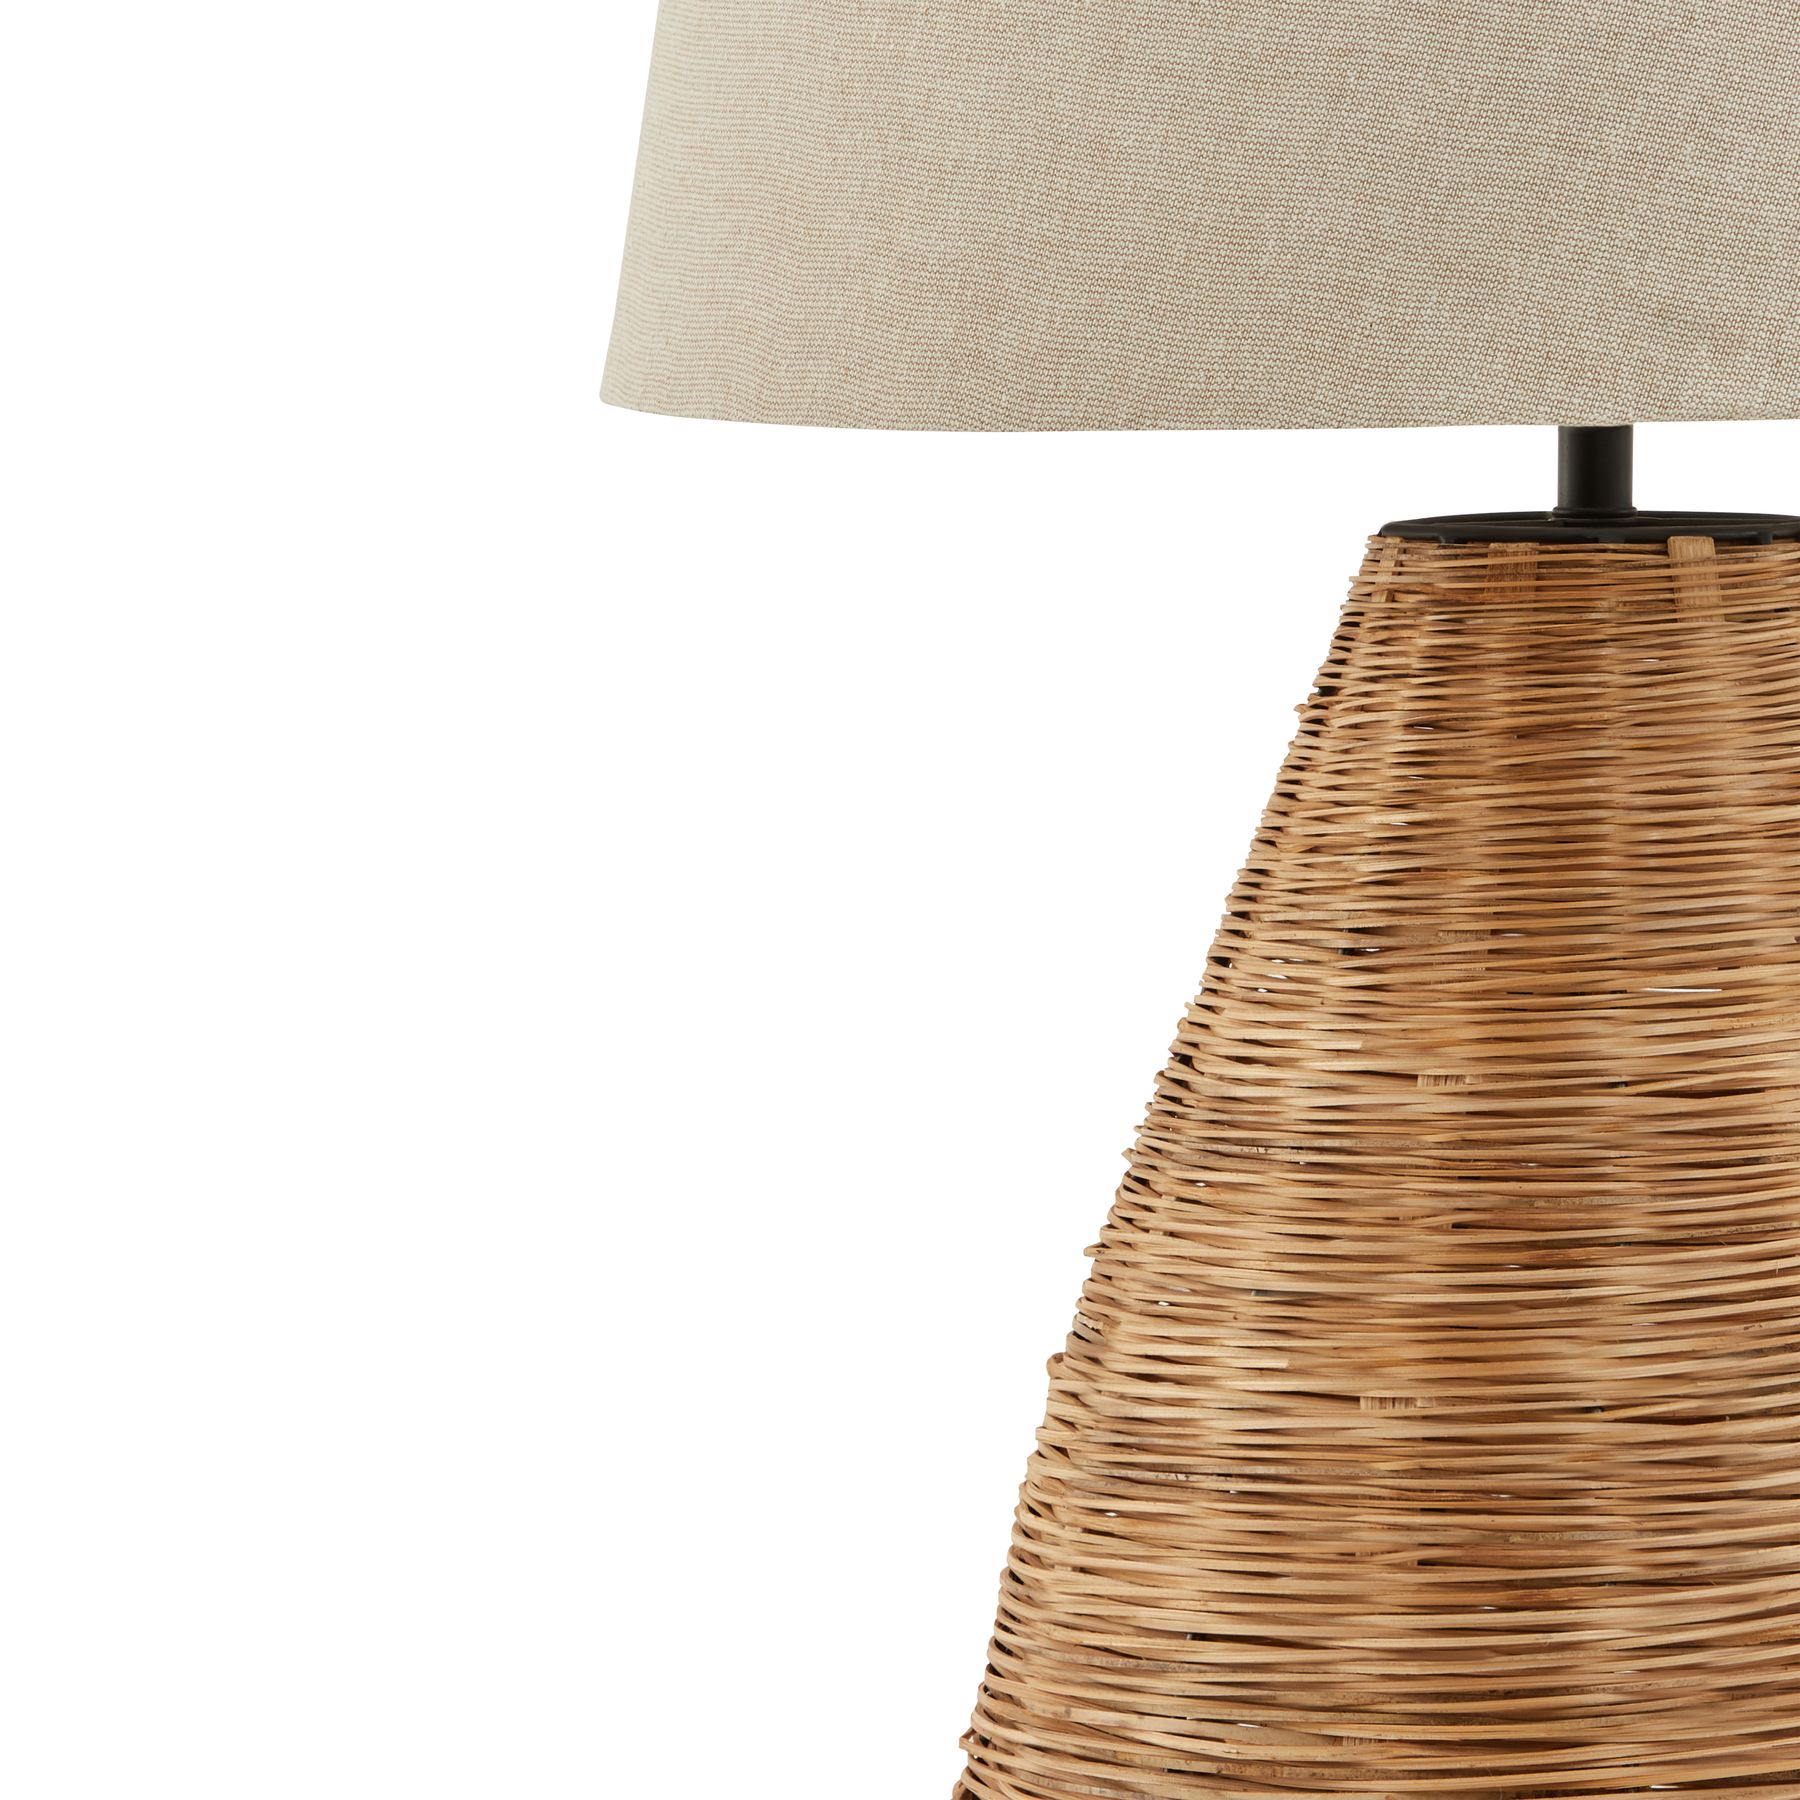 Conical Wicker Table Lamp With Linen Shade - Image 2